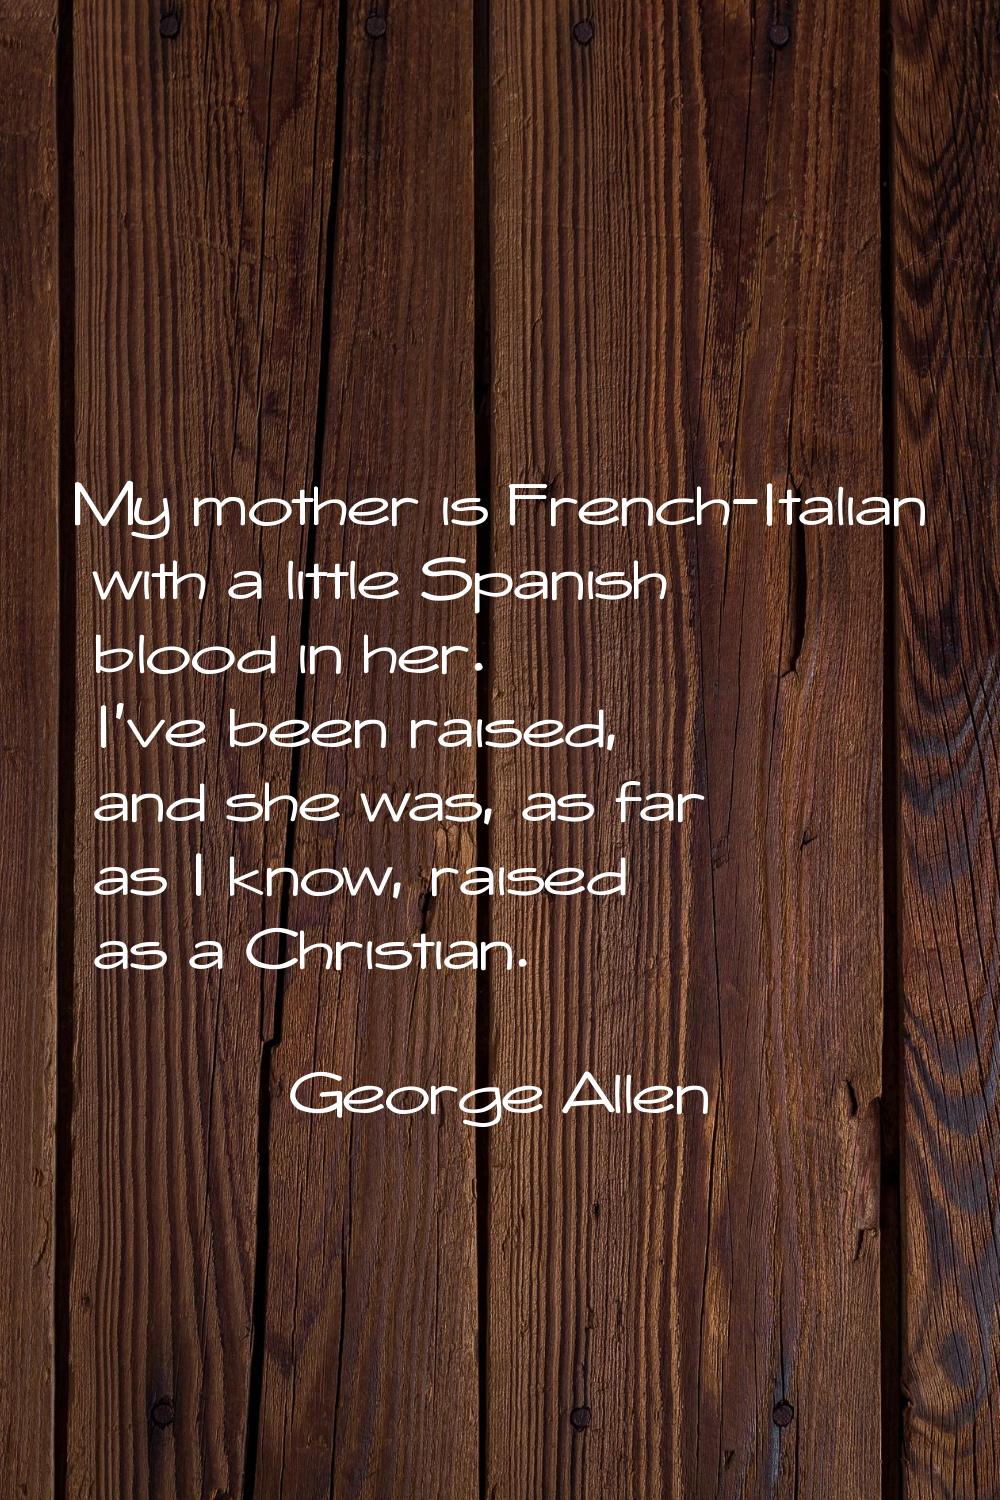 My mother is French-Italian with a little Spanish blood in her. I've been raised, and she was, as f